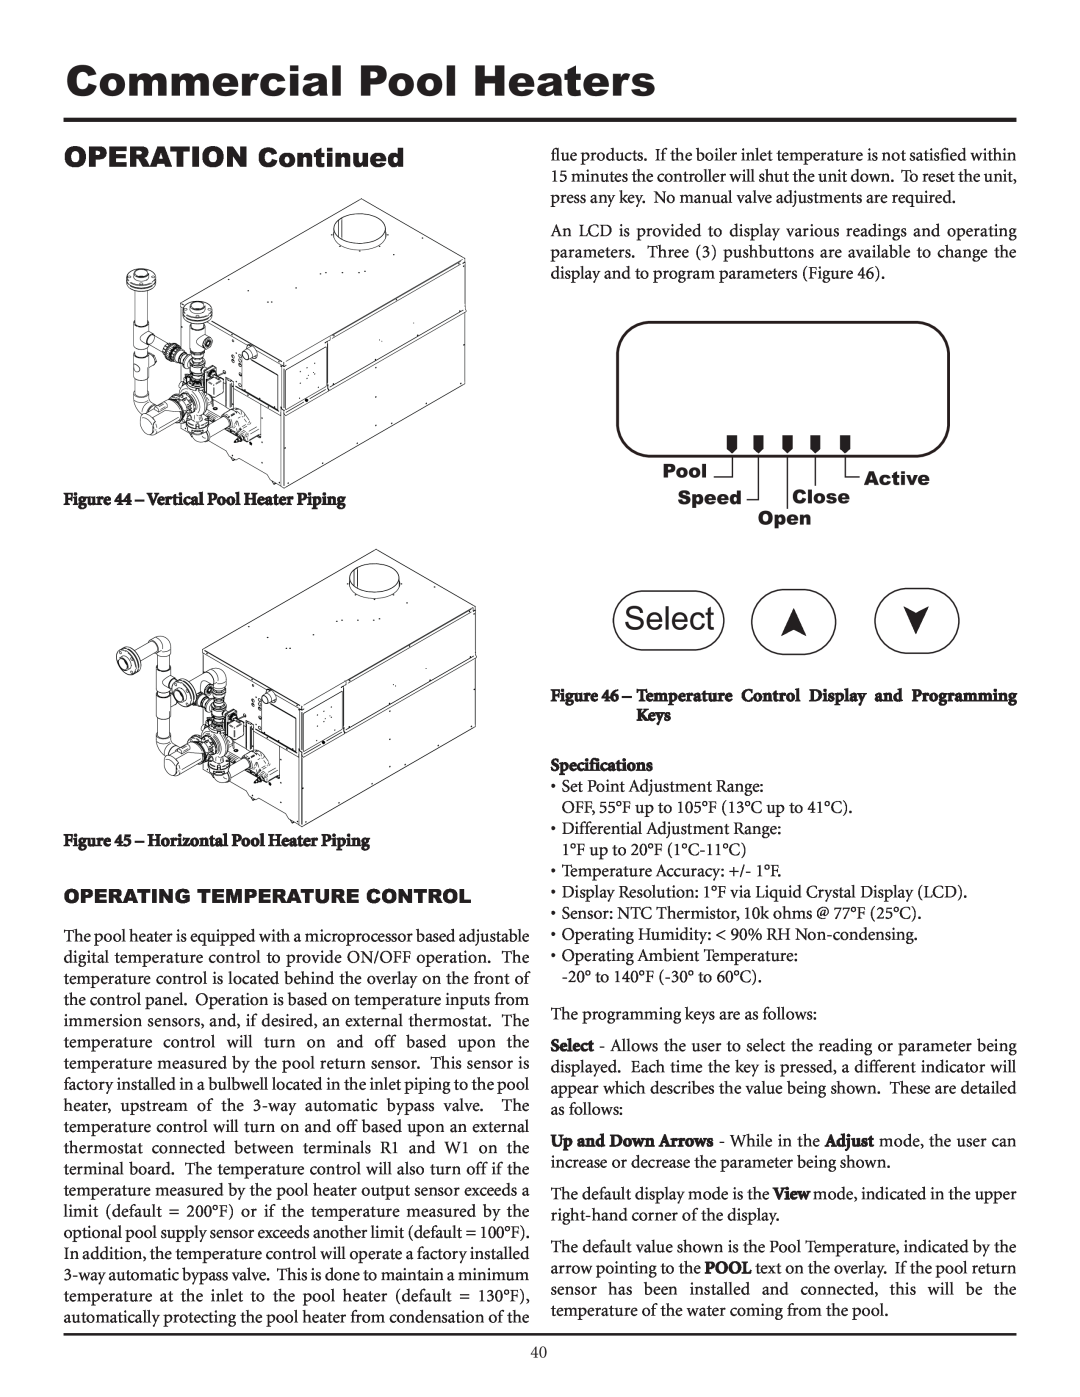 Lochinvar F0600187510 service manual OPERATION Continued, Operating Temperature Control, Commercial Pool Heaters 